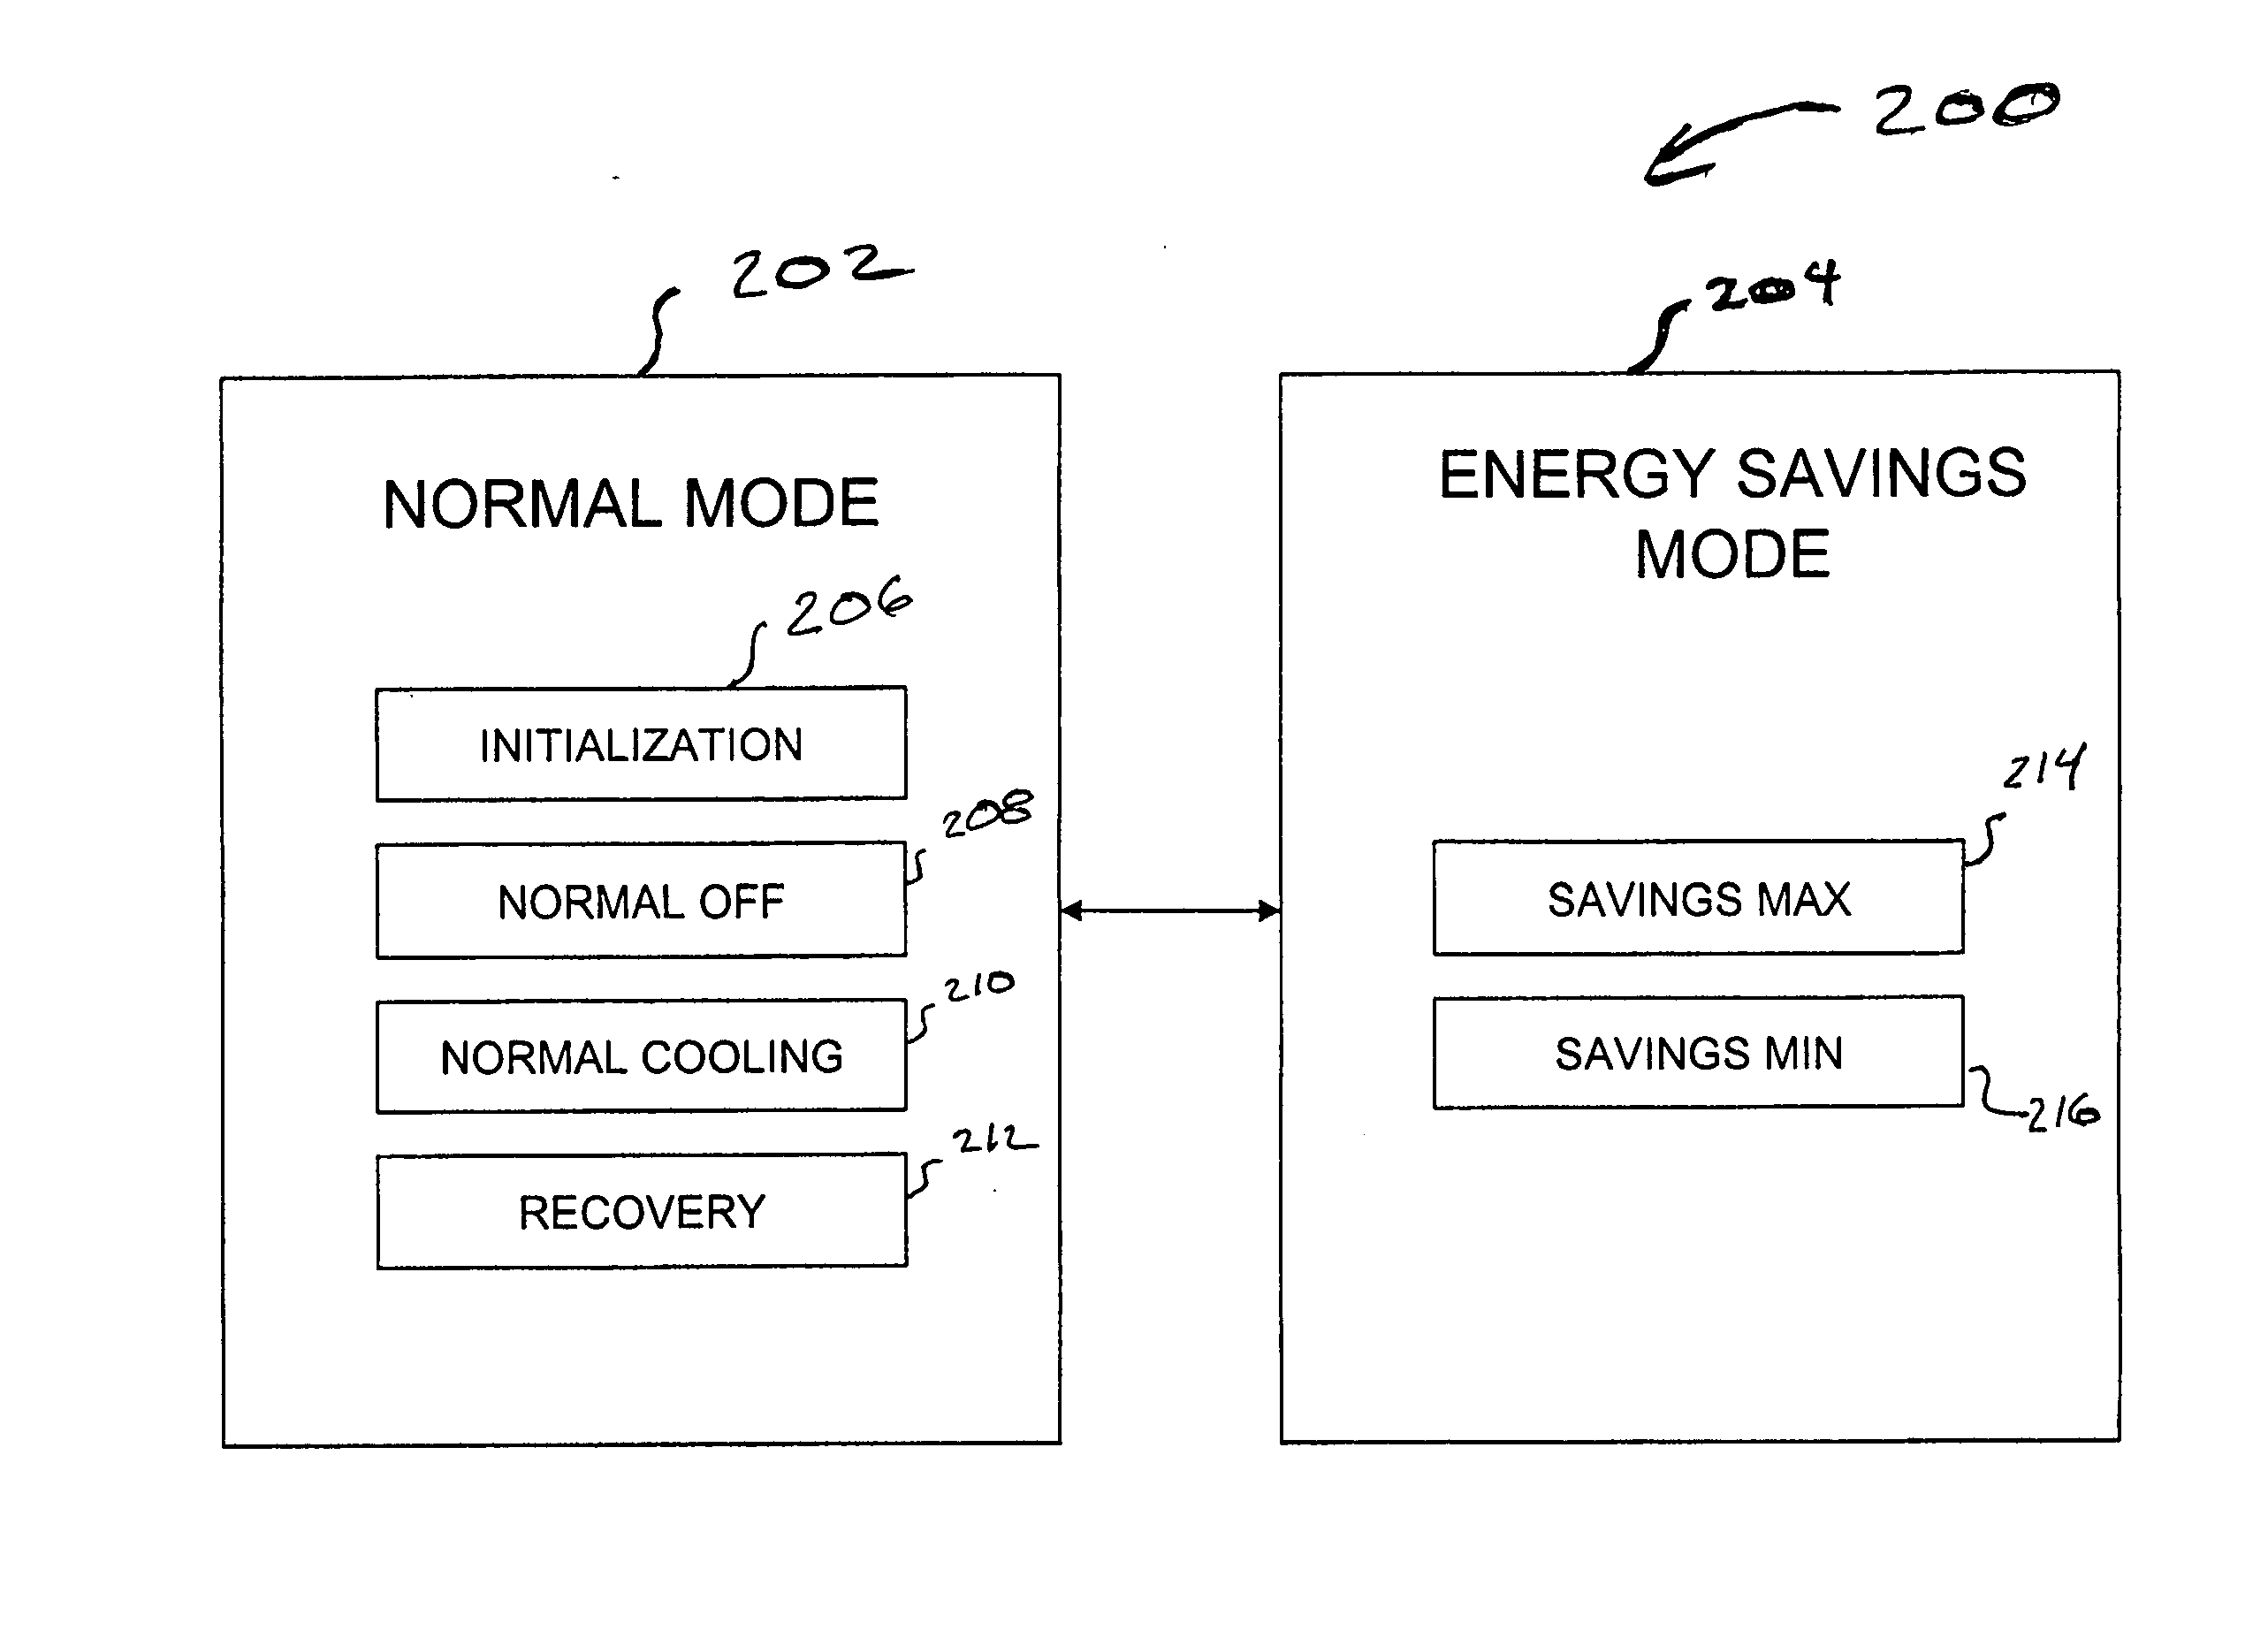 Method and apparatus for power management control of a cooling system in a consumer accessible appliance